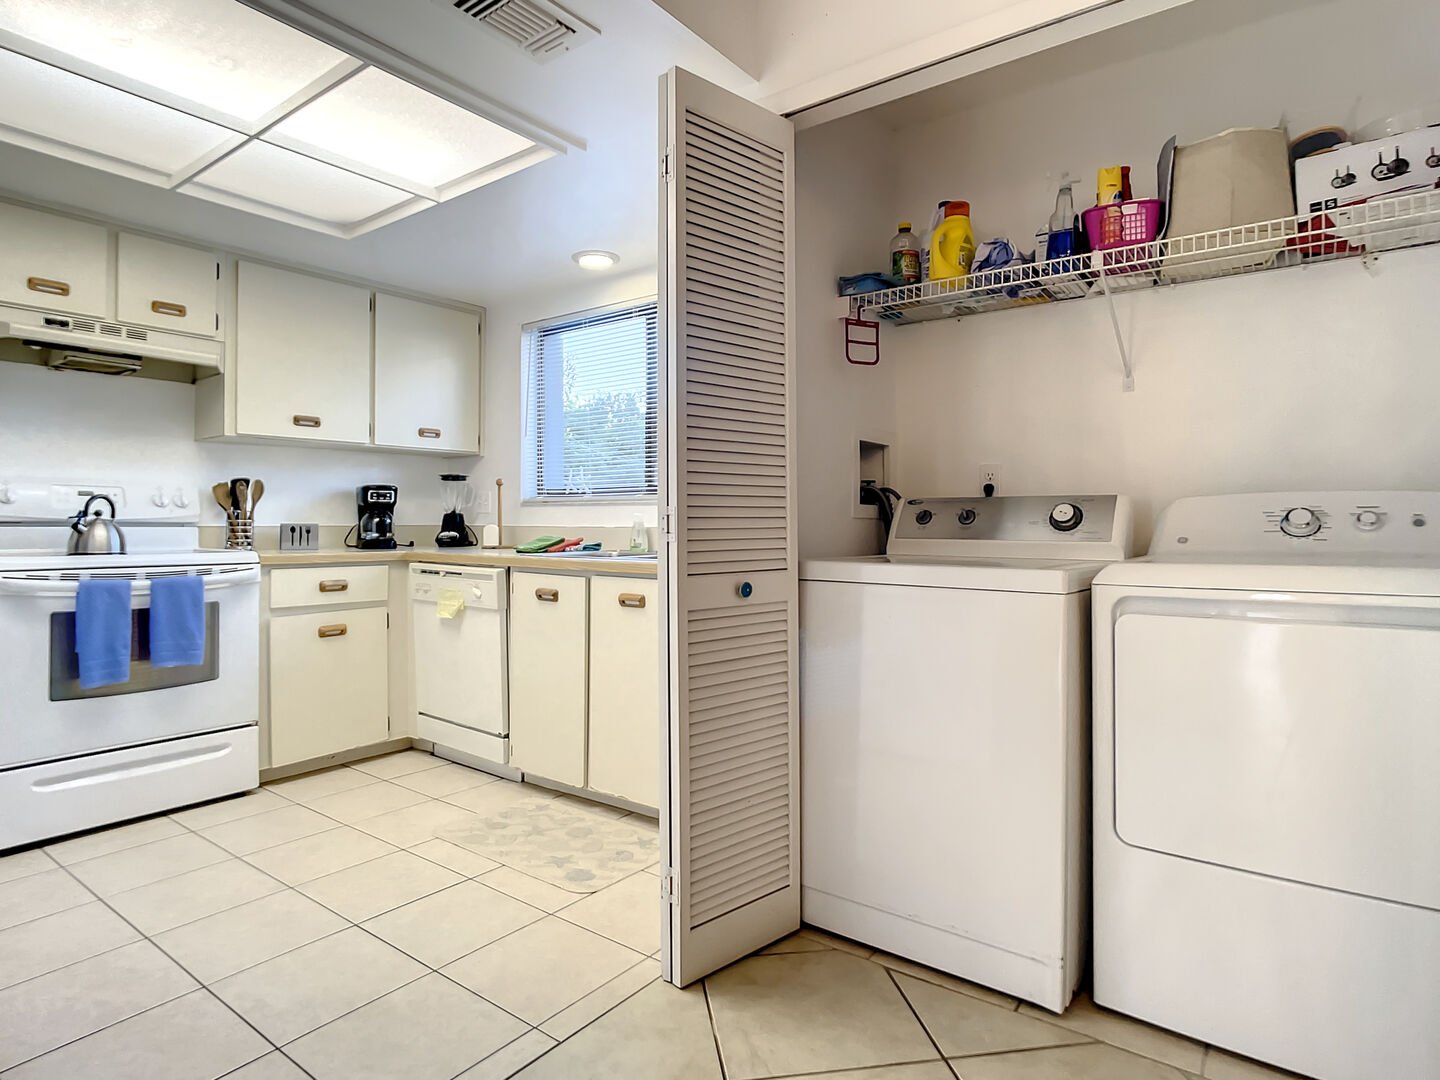 Laundry room with a full sized washer/dryer.